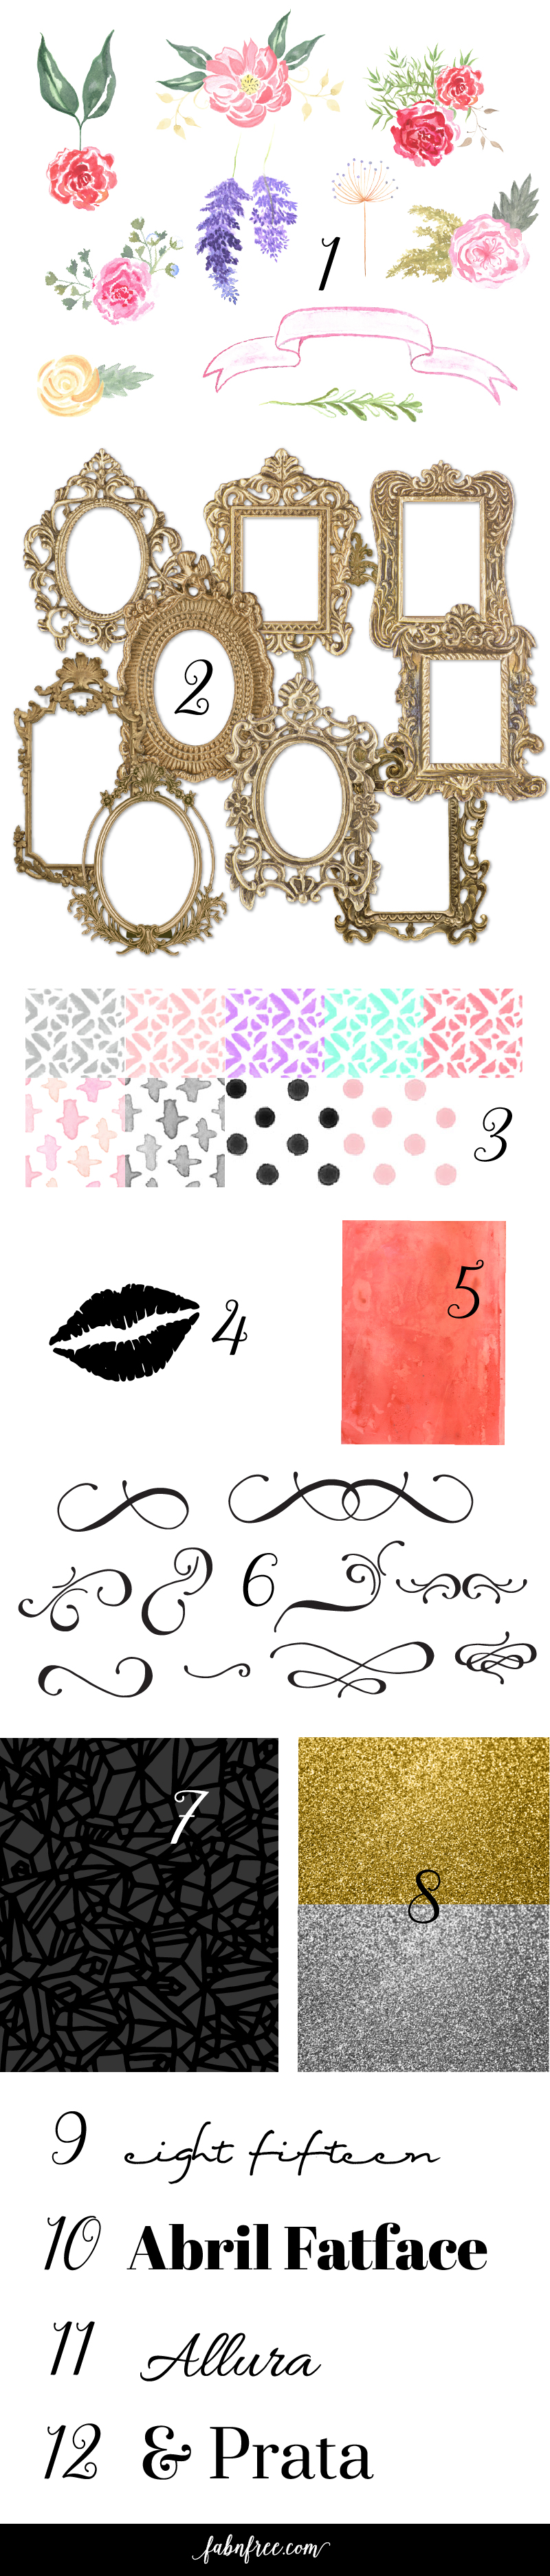 FREE!!!  81 Watercolor Florals, 10 amazing gold frames, 4 fonts, 13 backgrounds, lip clip art and 15 clip art swooshes!!!